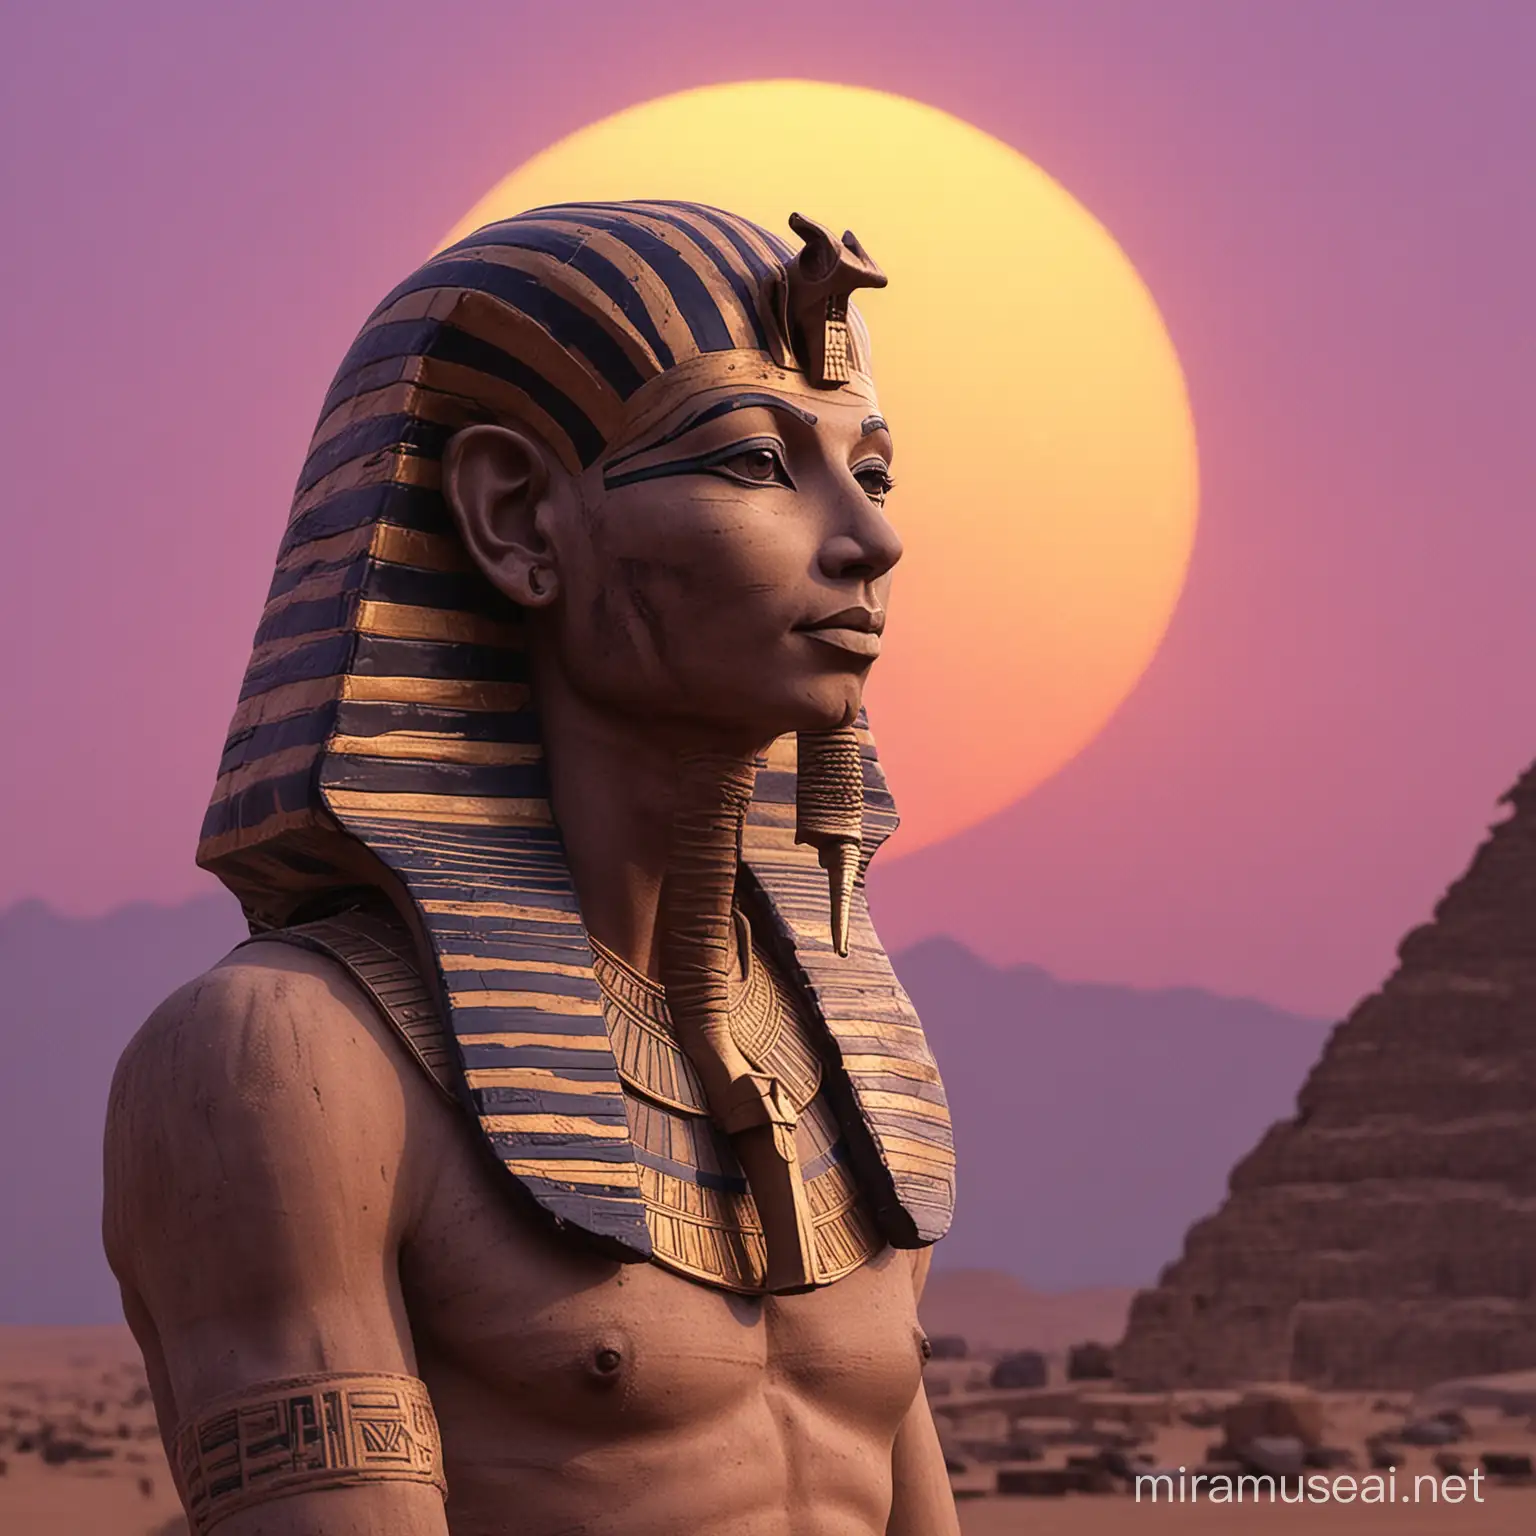 Pharaoh at Dusk Serene Majesty Amidst the Sands of Time